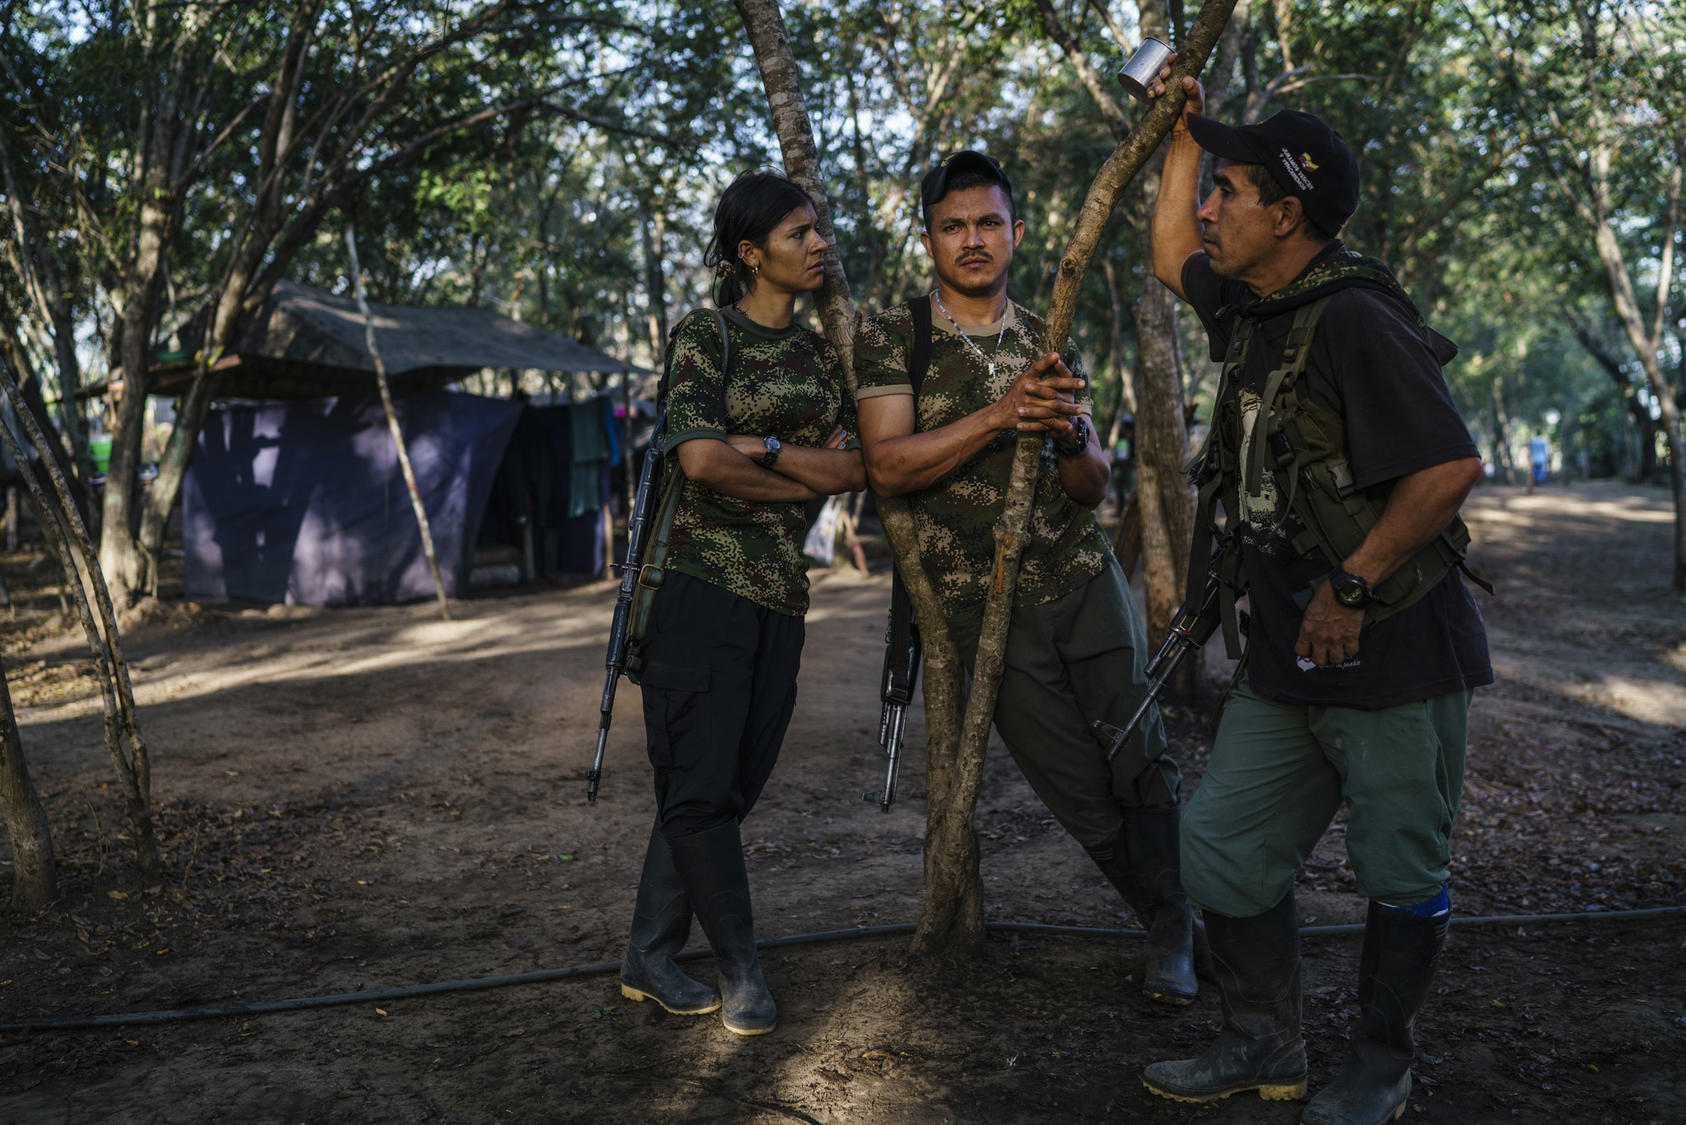 FARC members discuss their future in one of the zones set up to transition the former rebels back to civilian life, near La Paz, Colombia, Feb. 1, 2017. Photo Courtesy of The New York Times/Federico Rios Escobar